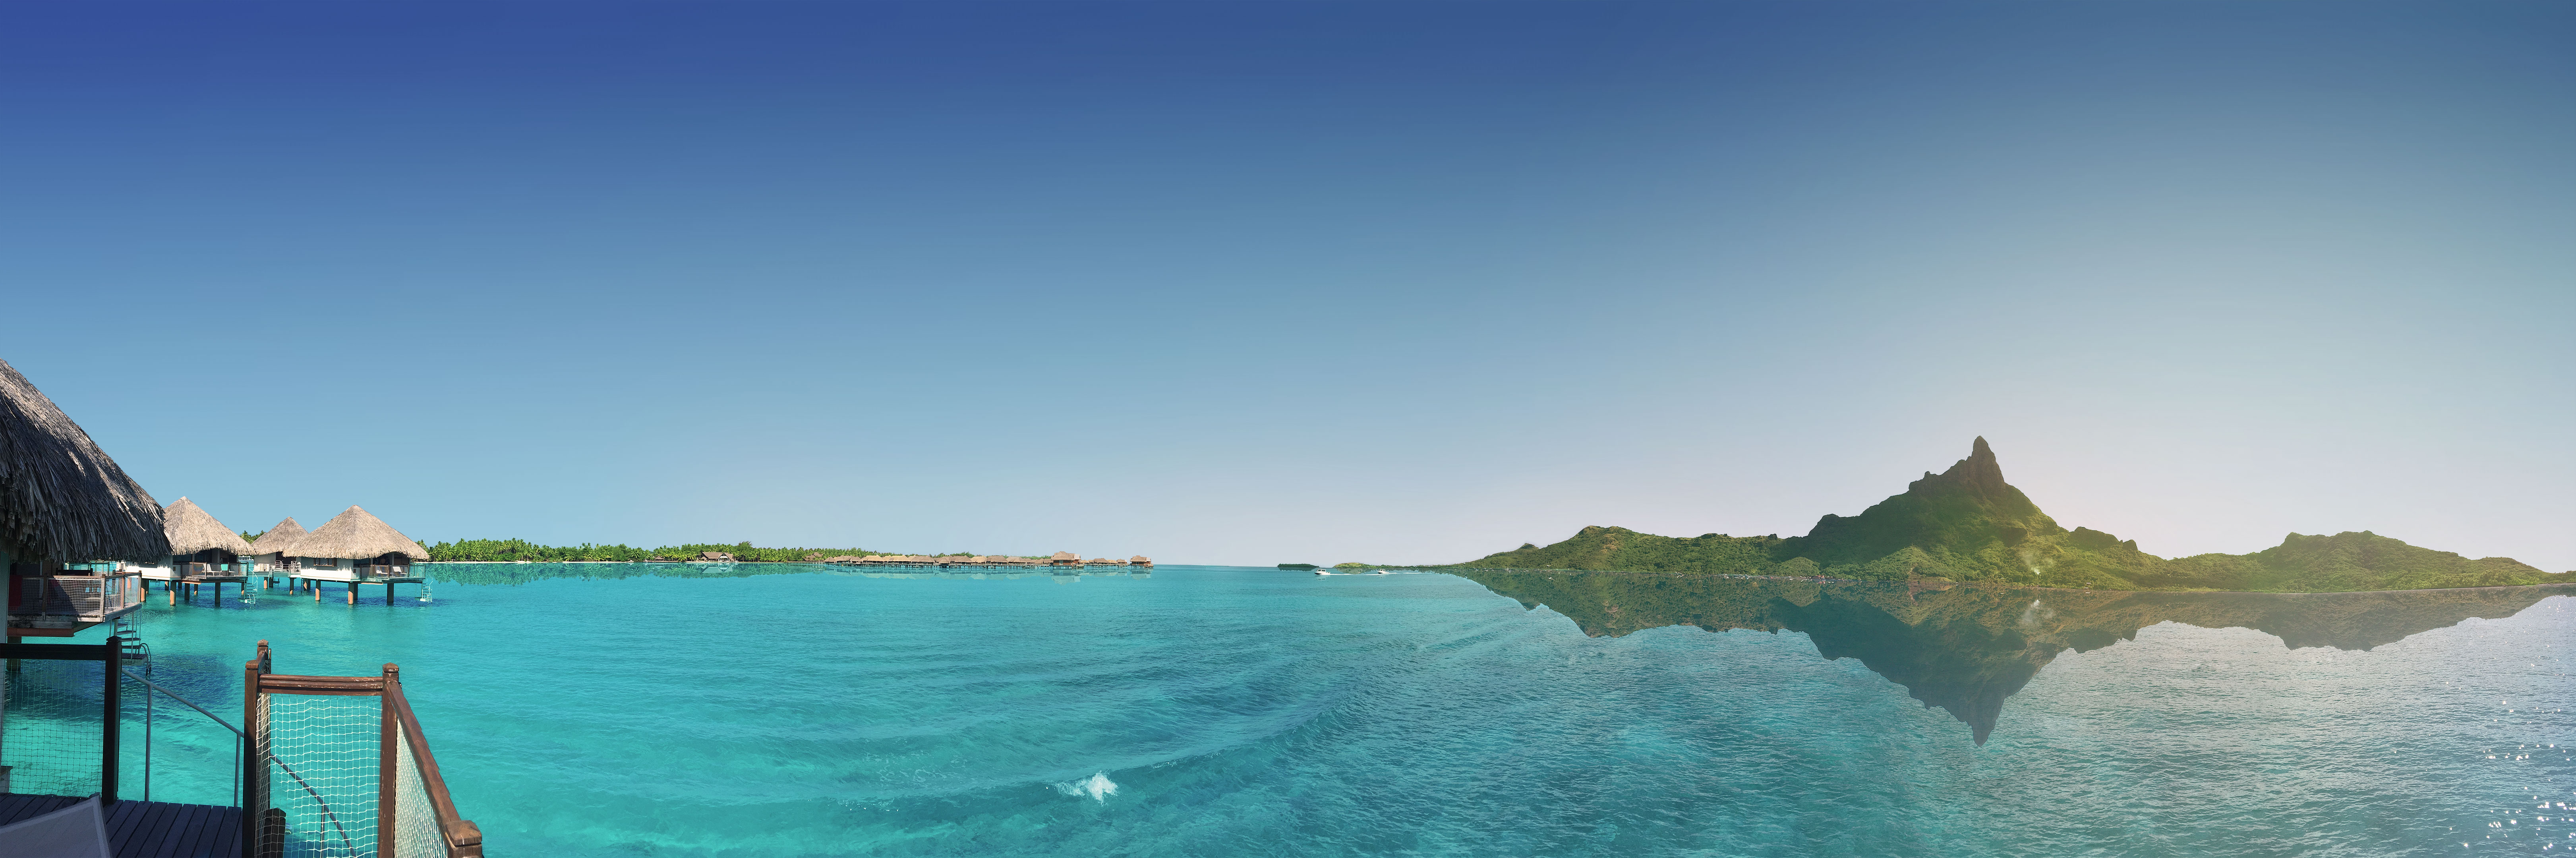 Bora Bora French Polynesian island 4K wallpaper background, large 360 panorama of the crystal blue water, mount Otemanu, stilt houses and palm trees, from Le Méridien Bora Hotel. (Nos Dren)